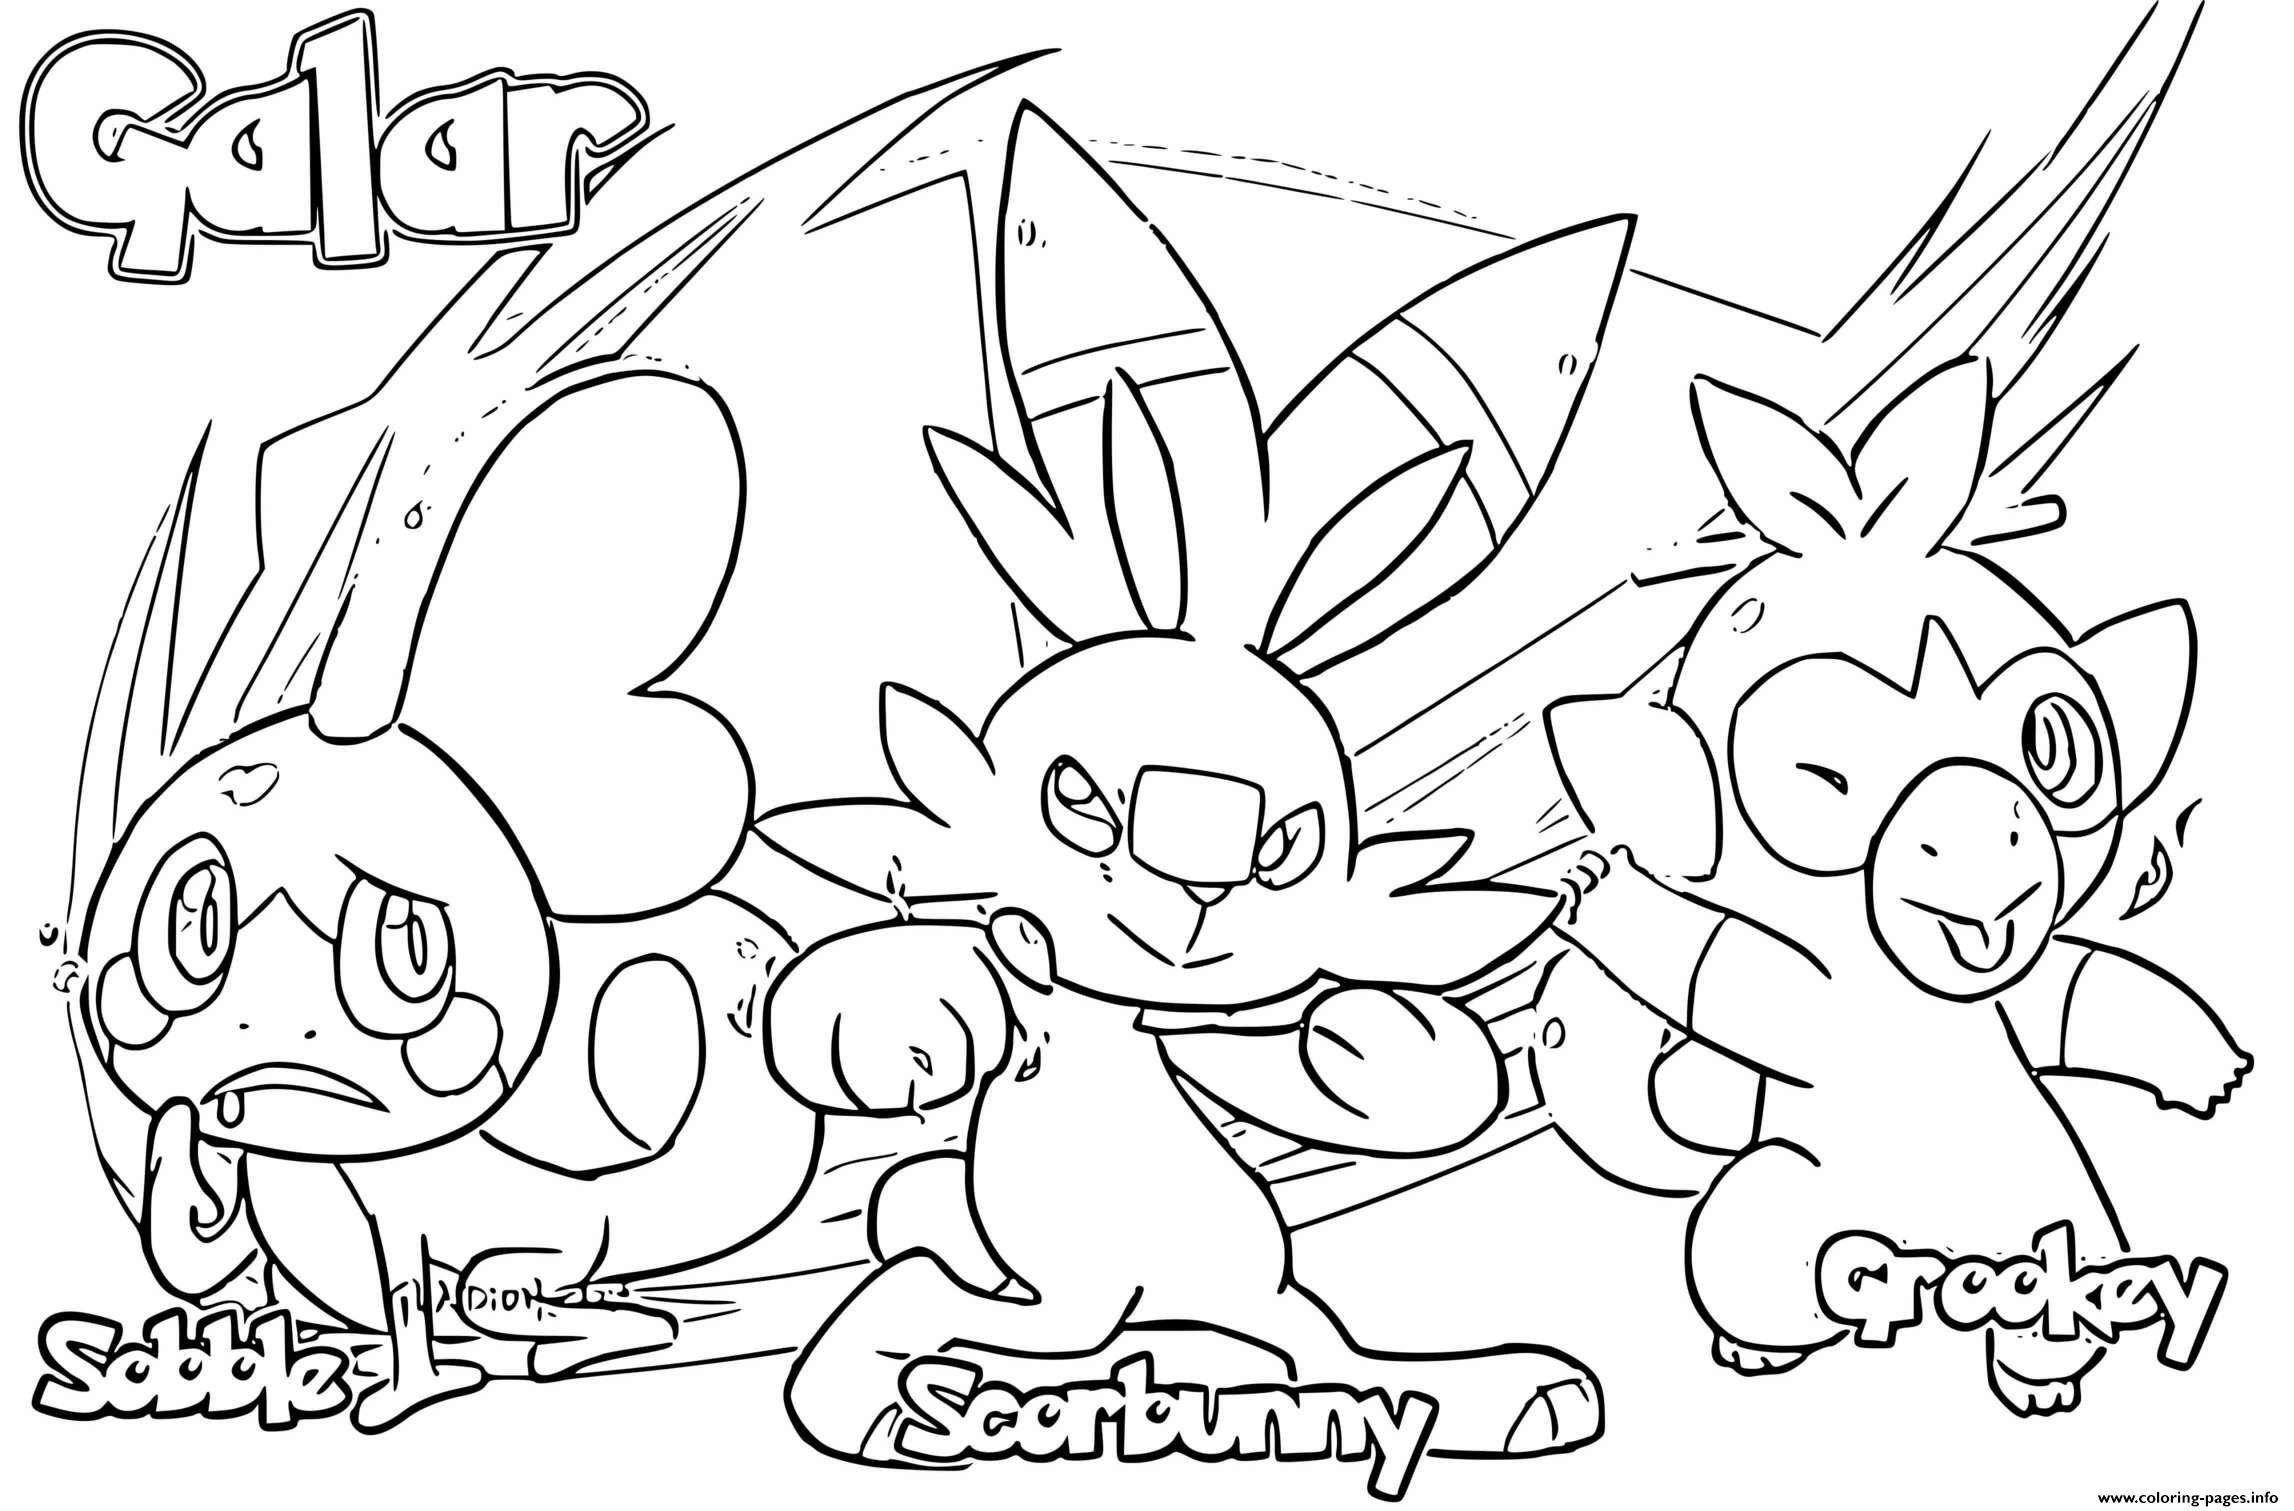  Pokemon  Sword  Shield  Starters By Gladioh Coloring  Pages  